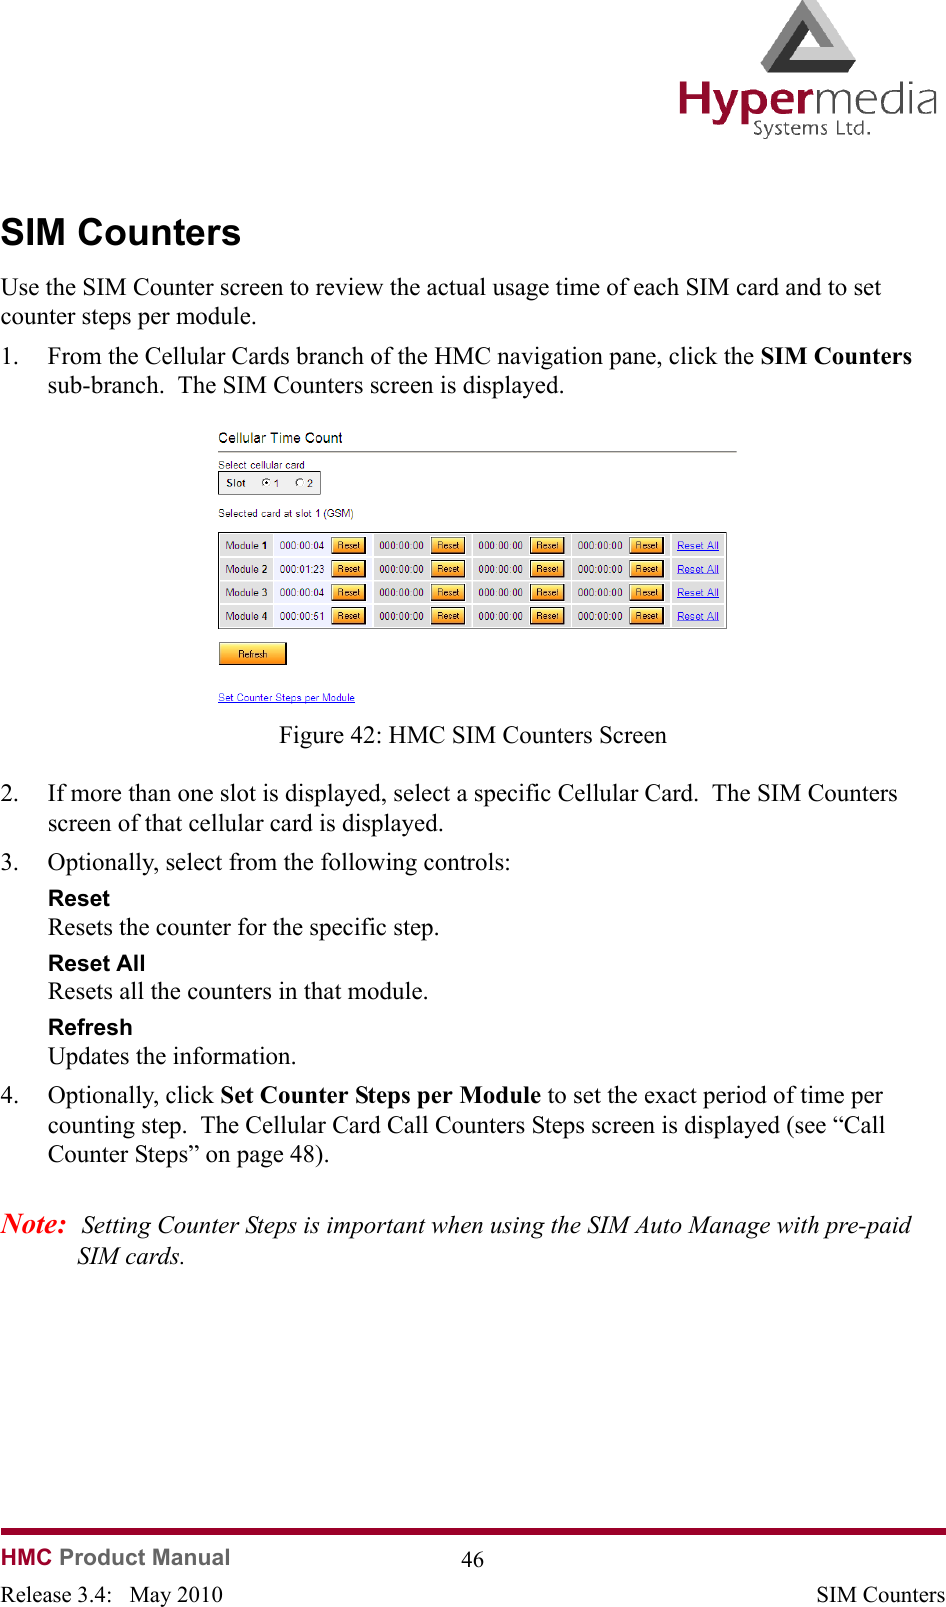   HMC Product Manual  46Release 3.4:   May 2010 SIM CountersSIM CountersUse the SIM Counter screen to review the actual usage time of each SIM card and to set counter steps per module. 1. From the Cellular Cards branch of the HMC navigation pane, click the SIM Counters sub-branch.  The SIM Counters screen is displayed.              Figure 42: HMC SIM Counters Screen2. If more than one slot is displayed, select a specific Cellular Card.  The SIM Counters screen of that cellular card is displayed.3. Optionally, select from the following controls:Reset  Resets the counter for the specific step.Reset All  Resets all the counters in that module.Refresh  Updates the information.4. Optionally, click Set Counter Steps per Module to set the exact period of time per counting step.  The Cellular Card Call Counters Steps screen is displayed (see “Call Counter Steps” on page 48).Note:  Setting Counter Steps is important when using the SIM Auto Manage with pre-paid SIM cards.